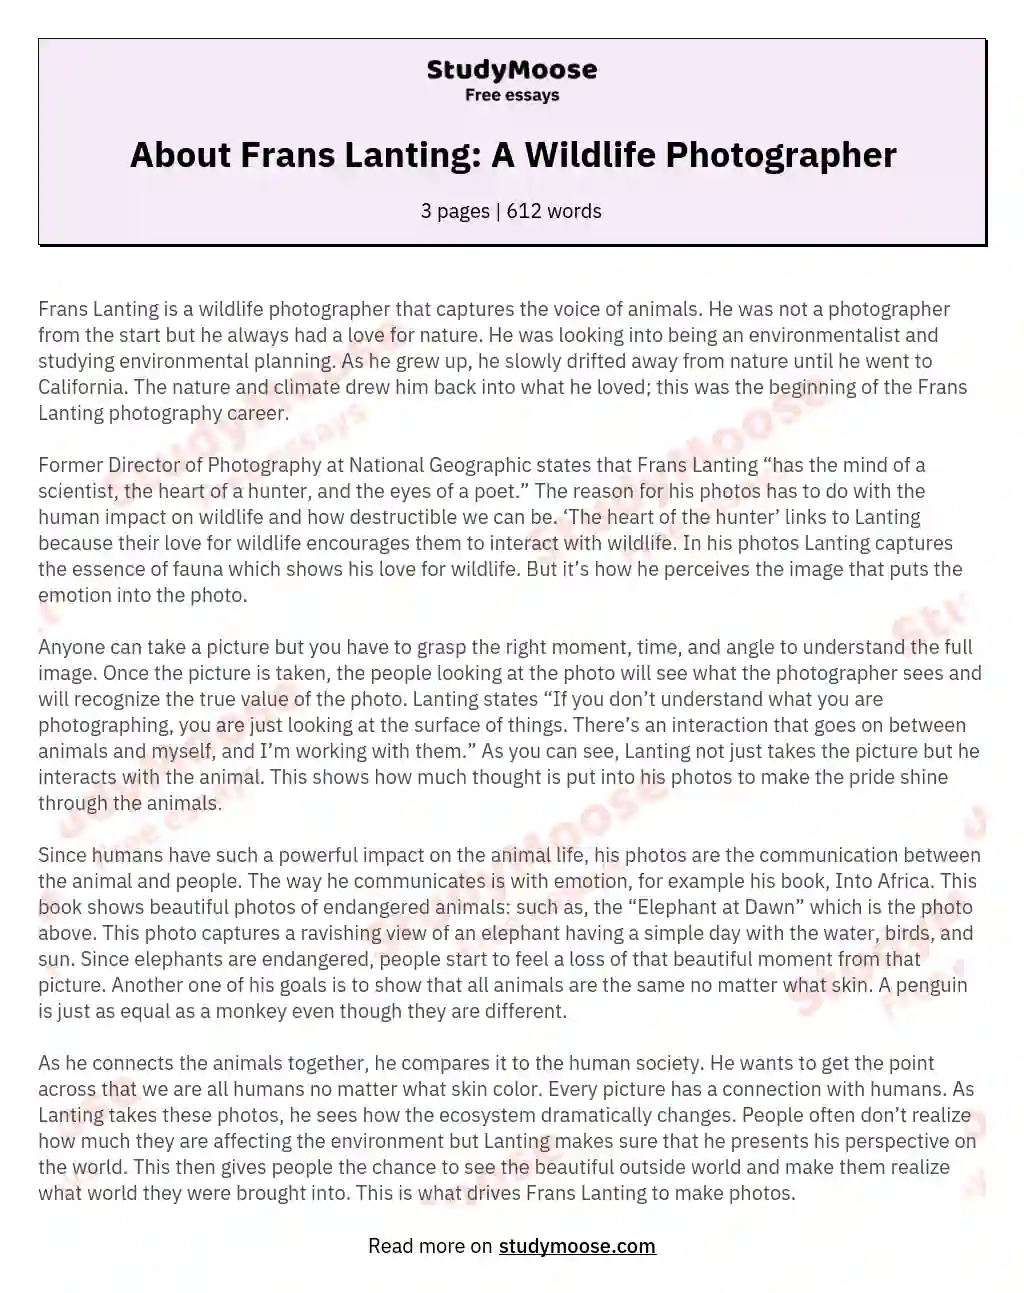 About Frans Lanting: A Wildlife Photographer essay